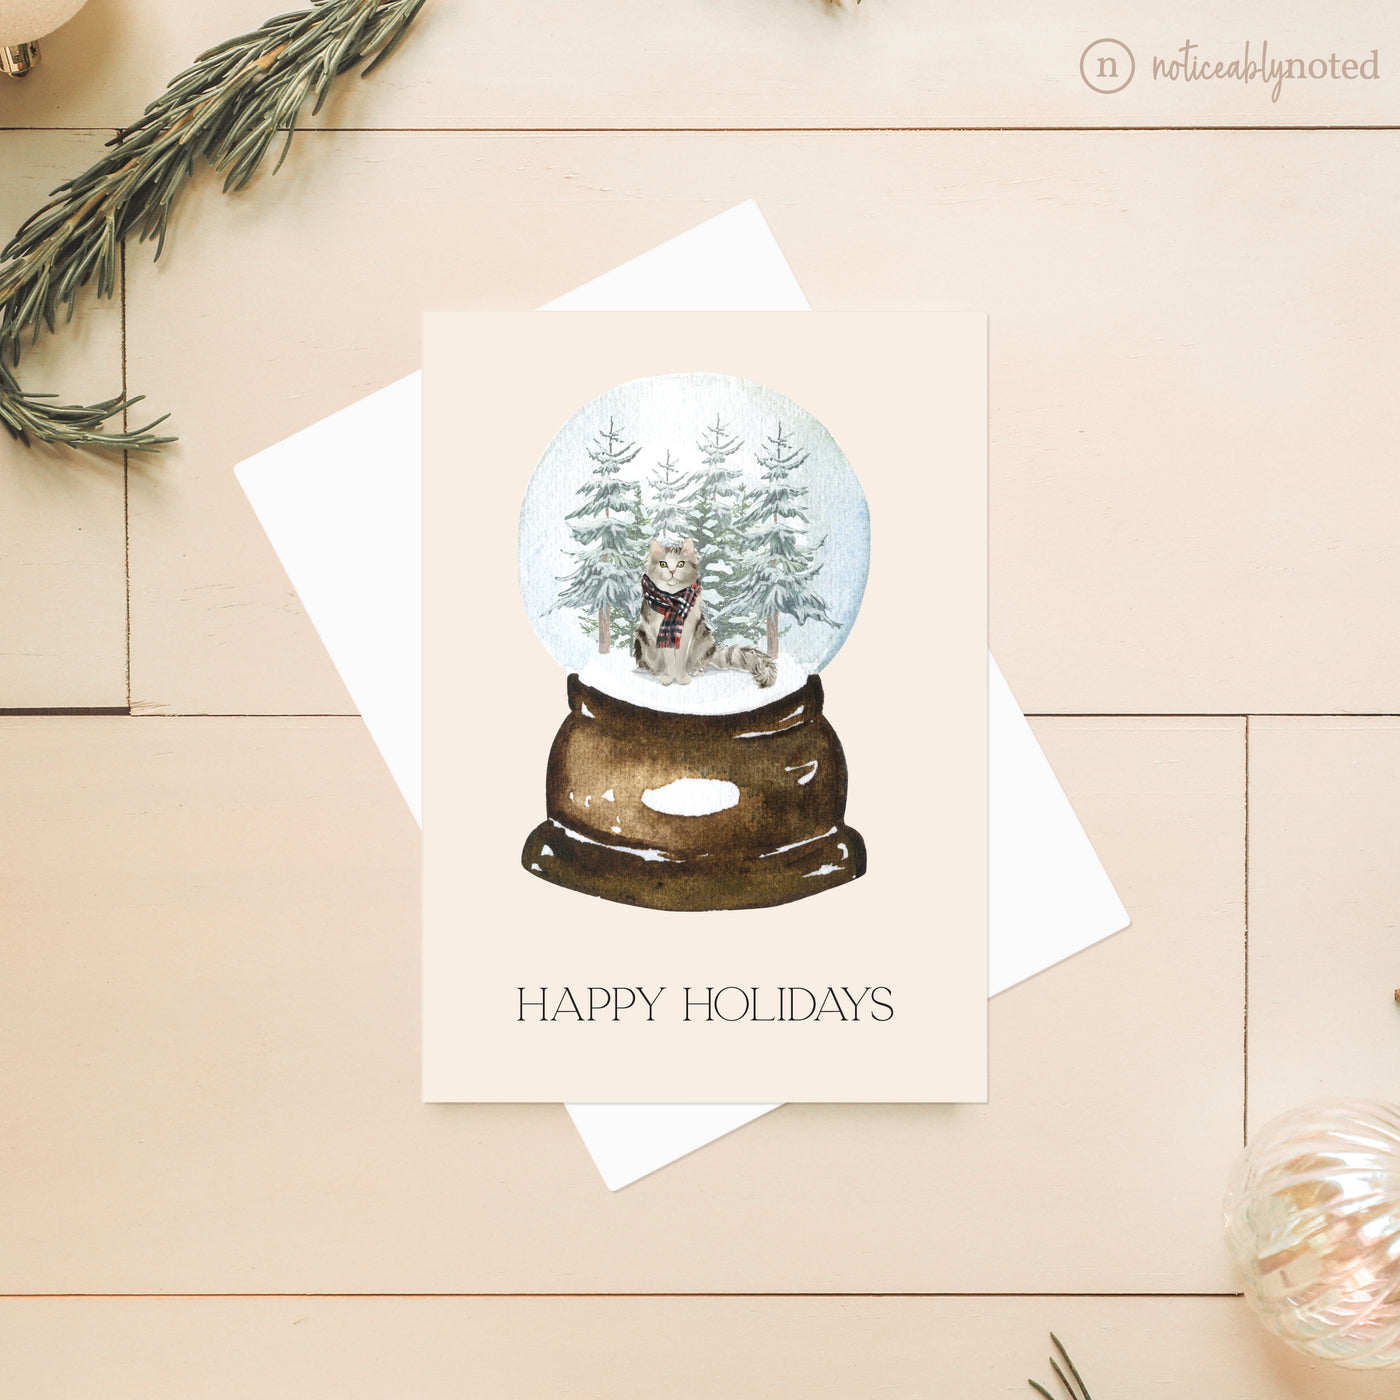 Ragamuffin Christmas Cards | Noticeably Noted